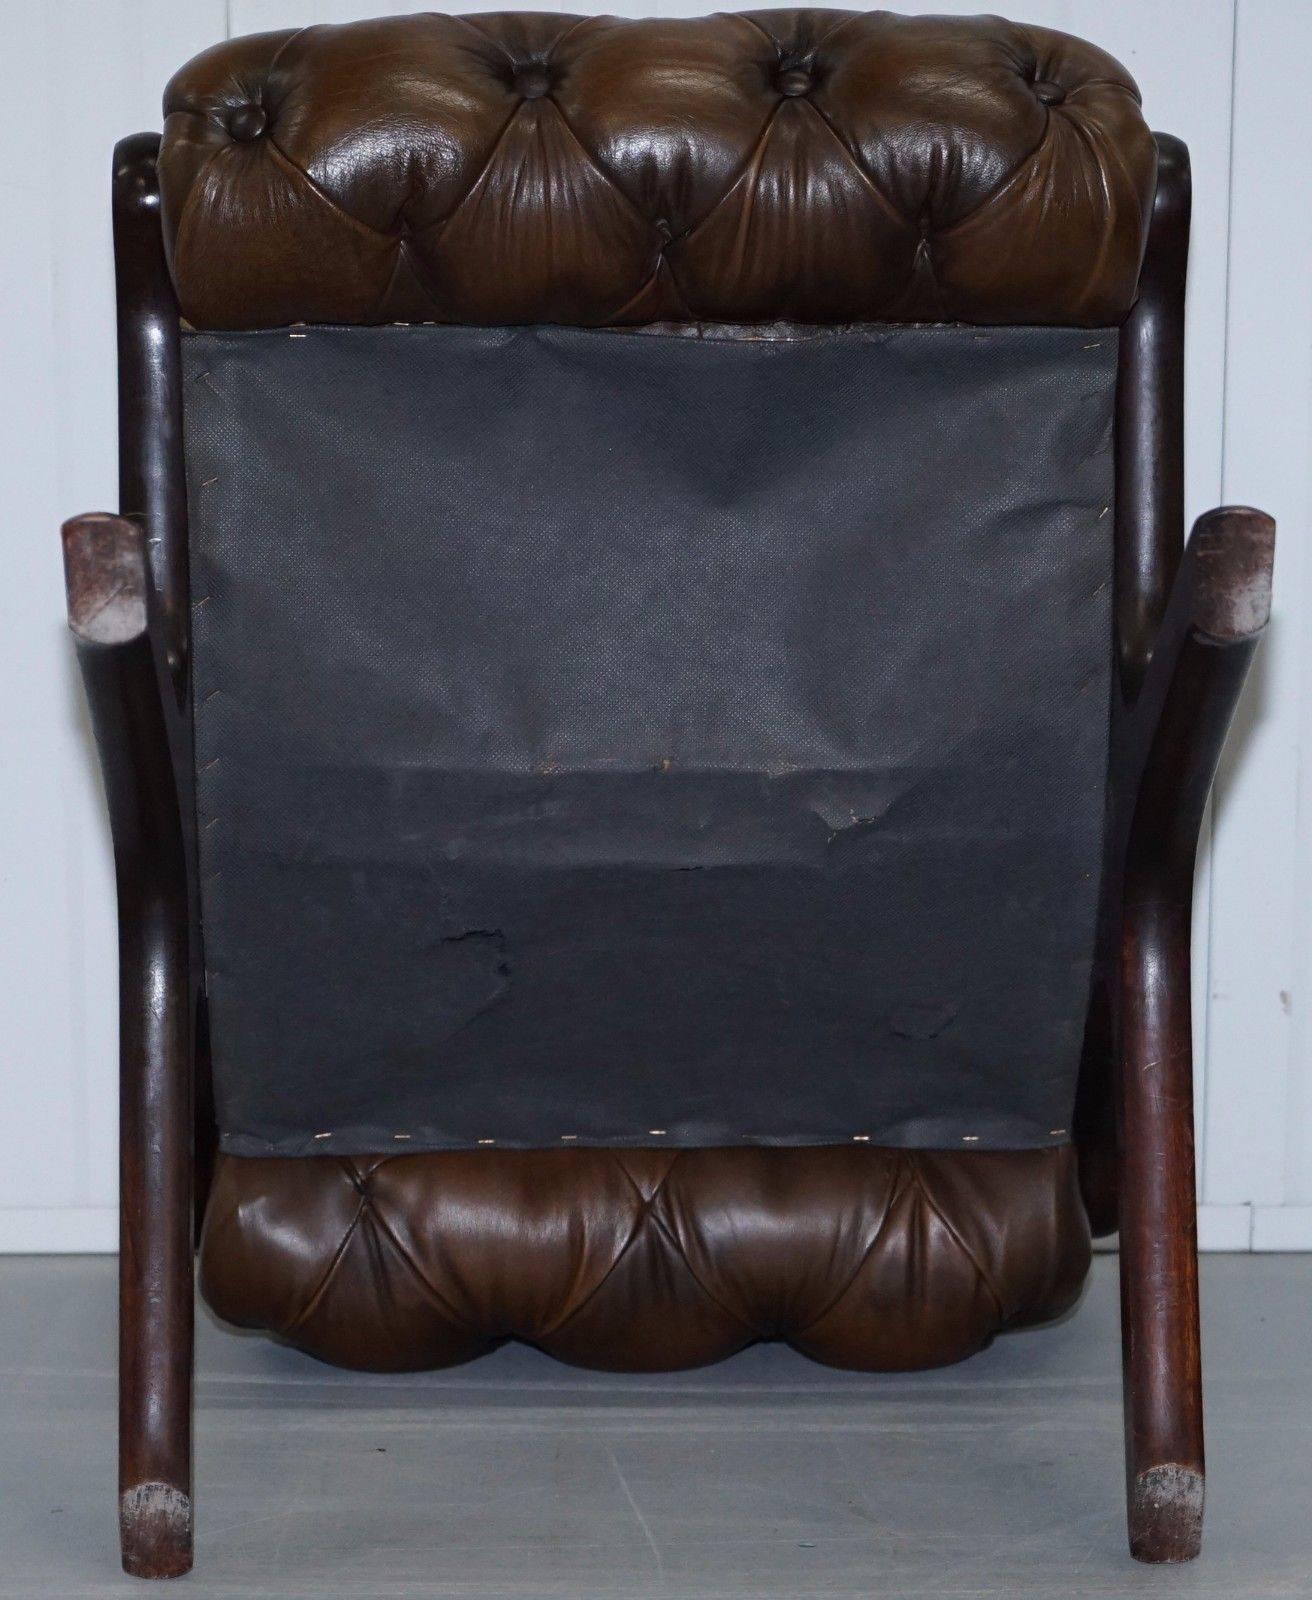 British Matching Pair of Vintage Aged Brown Leather Chesterfield Footstools / Ottomans